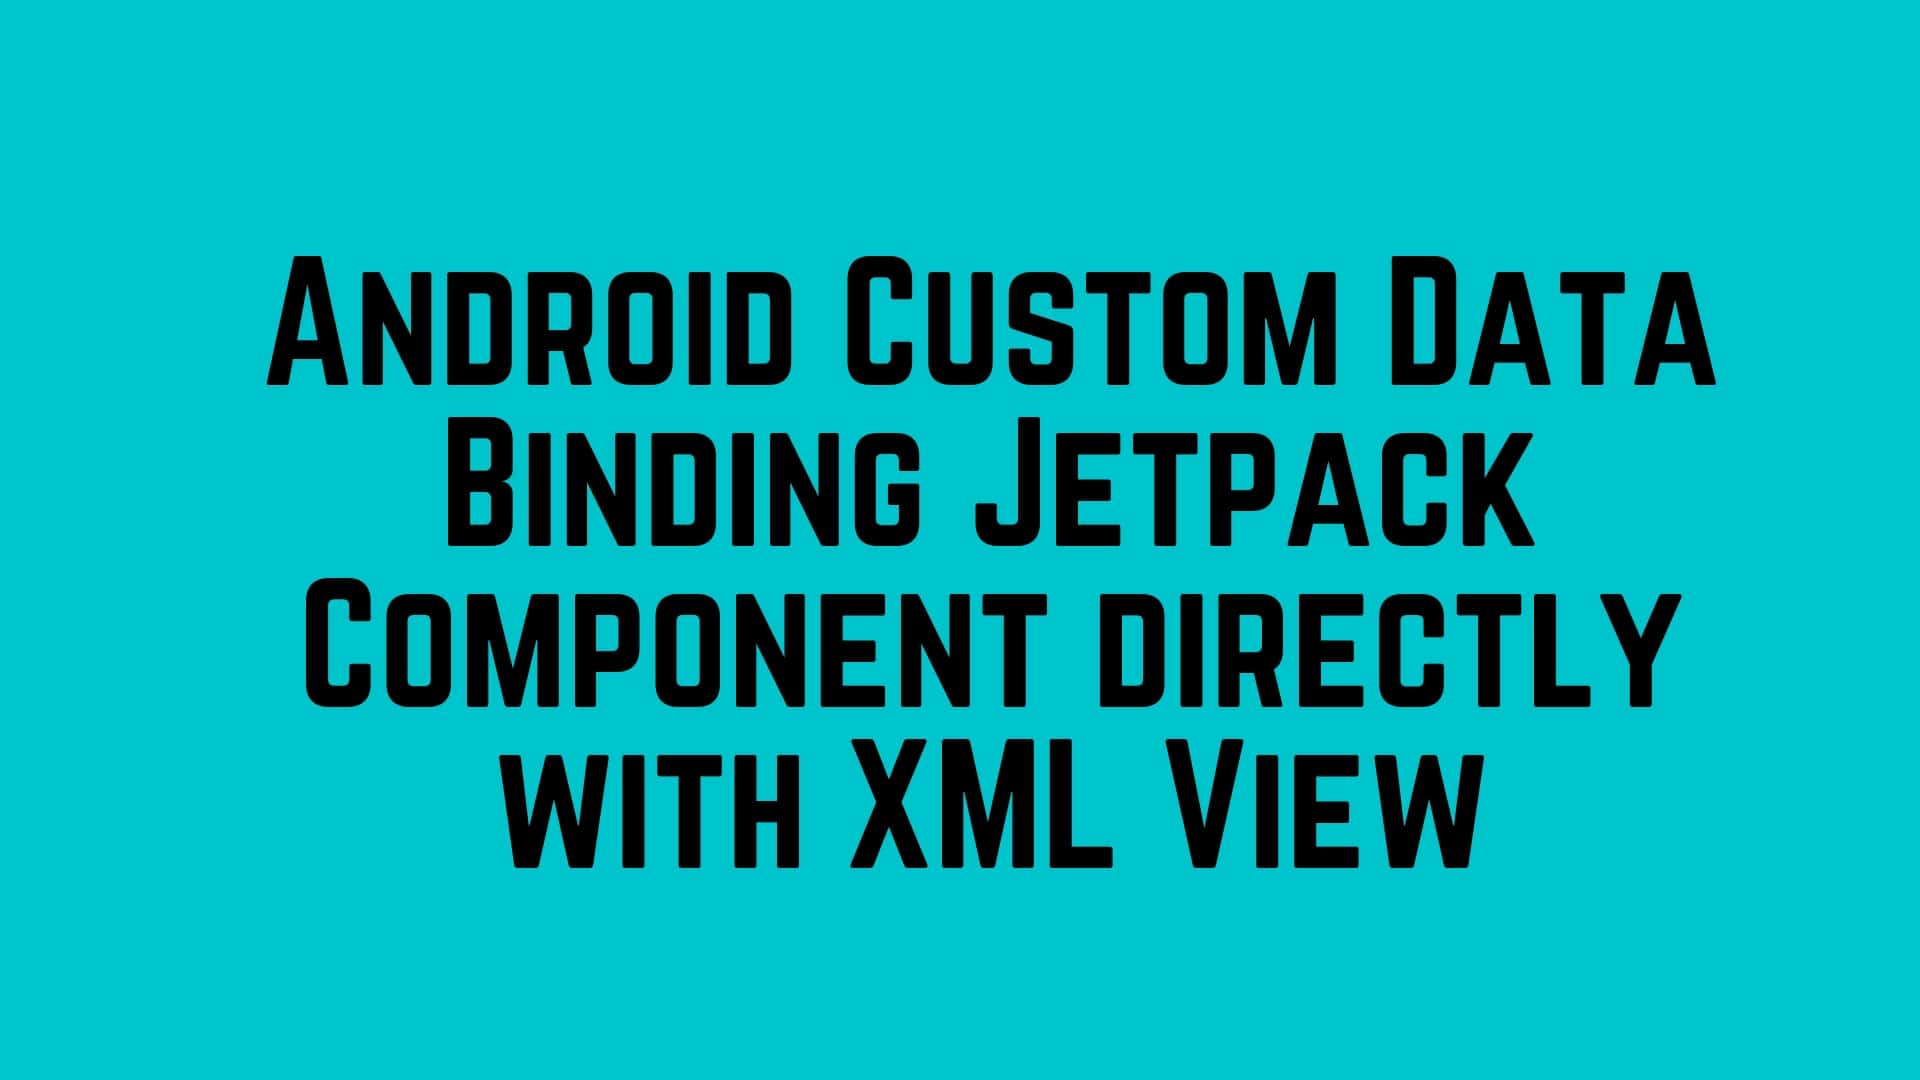 Android Custom Data Binding Jetpack Component directly with XML View